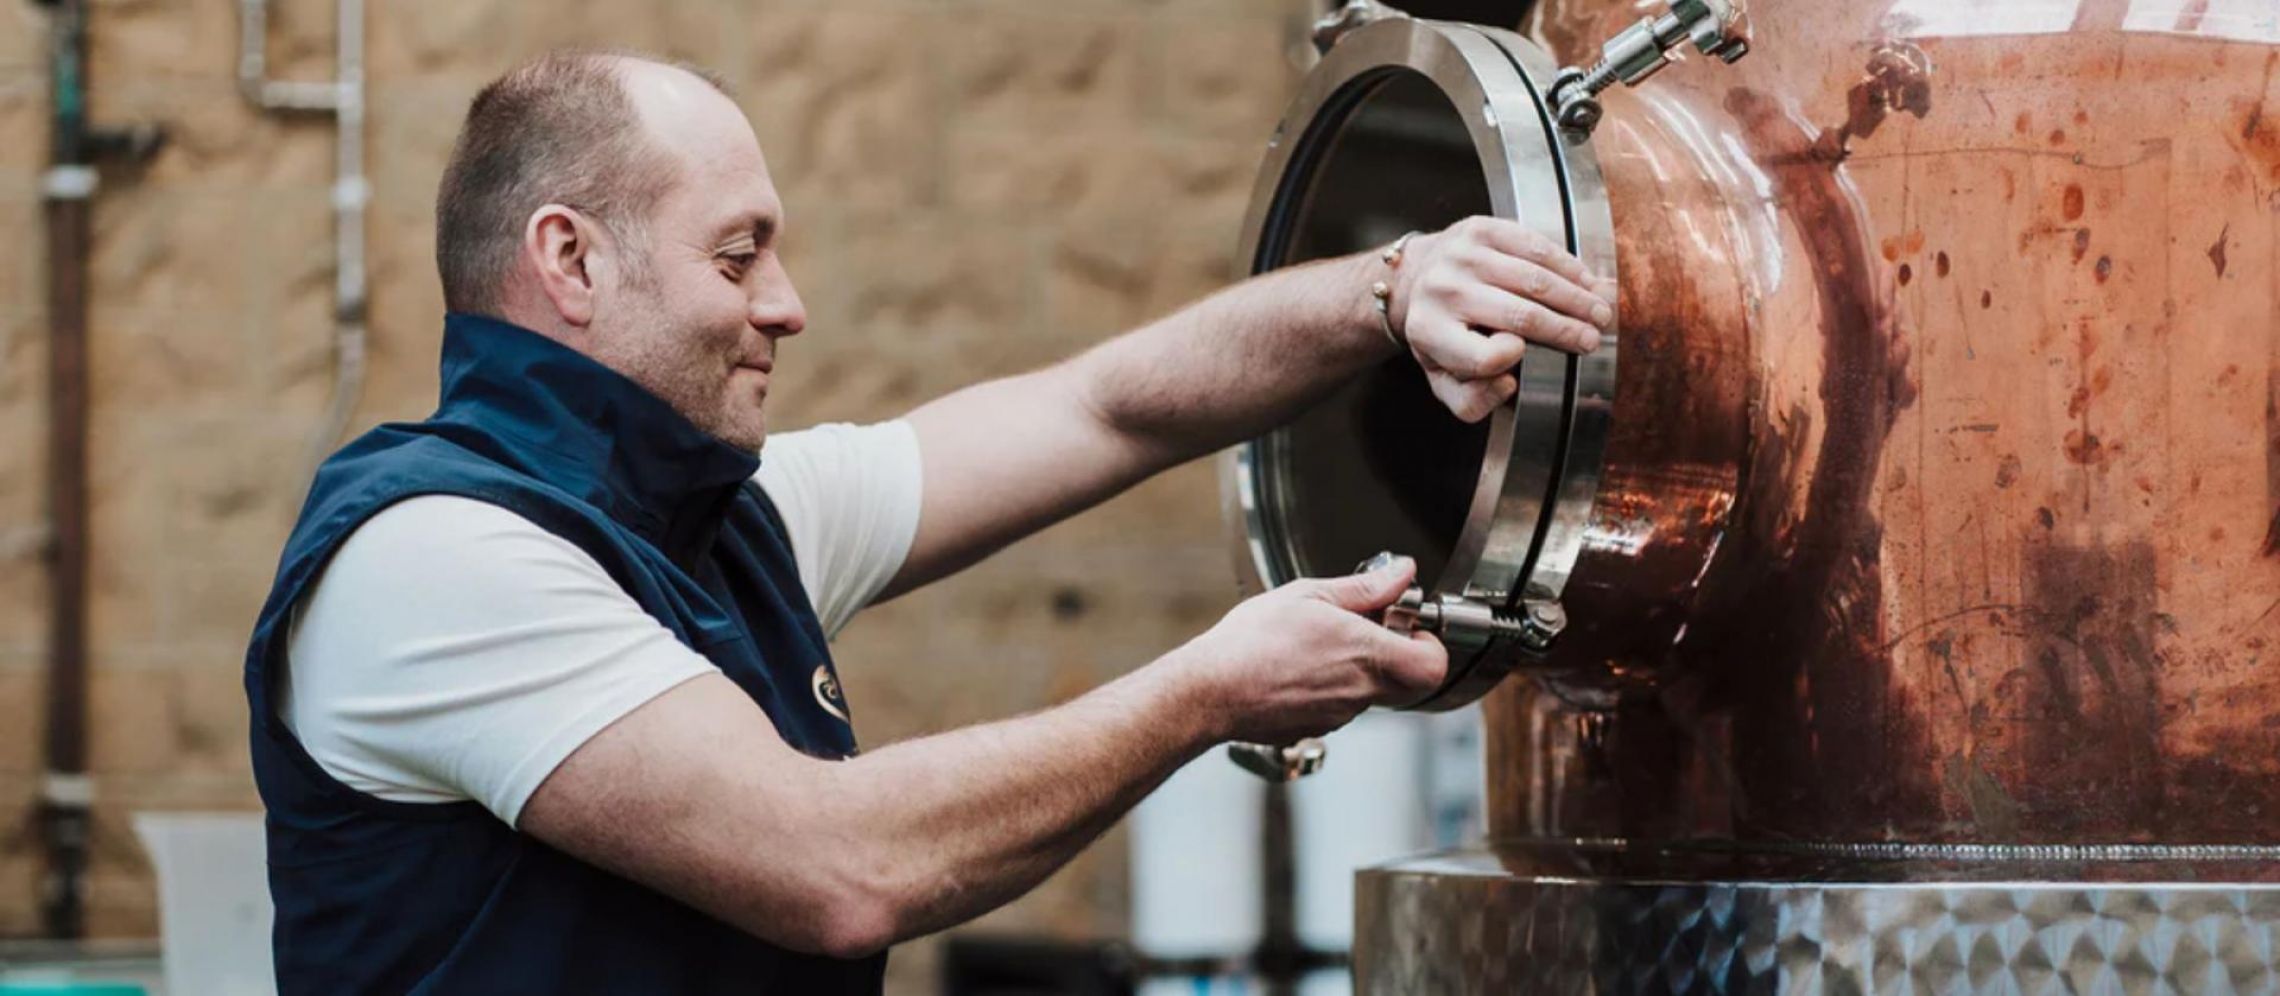 Photo for: Distilling is Like Farming. It’s a Way of Life, Says Xavier, Co Founder of Isle of Wight Distillery